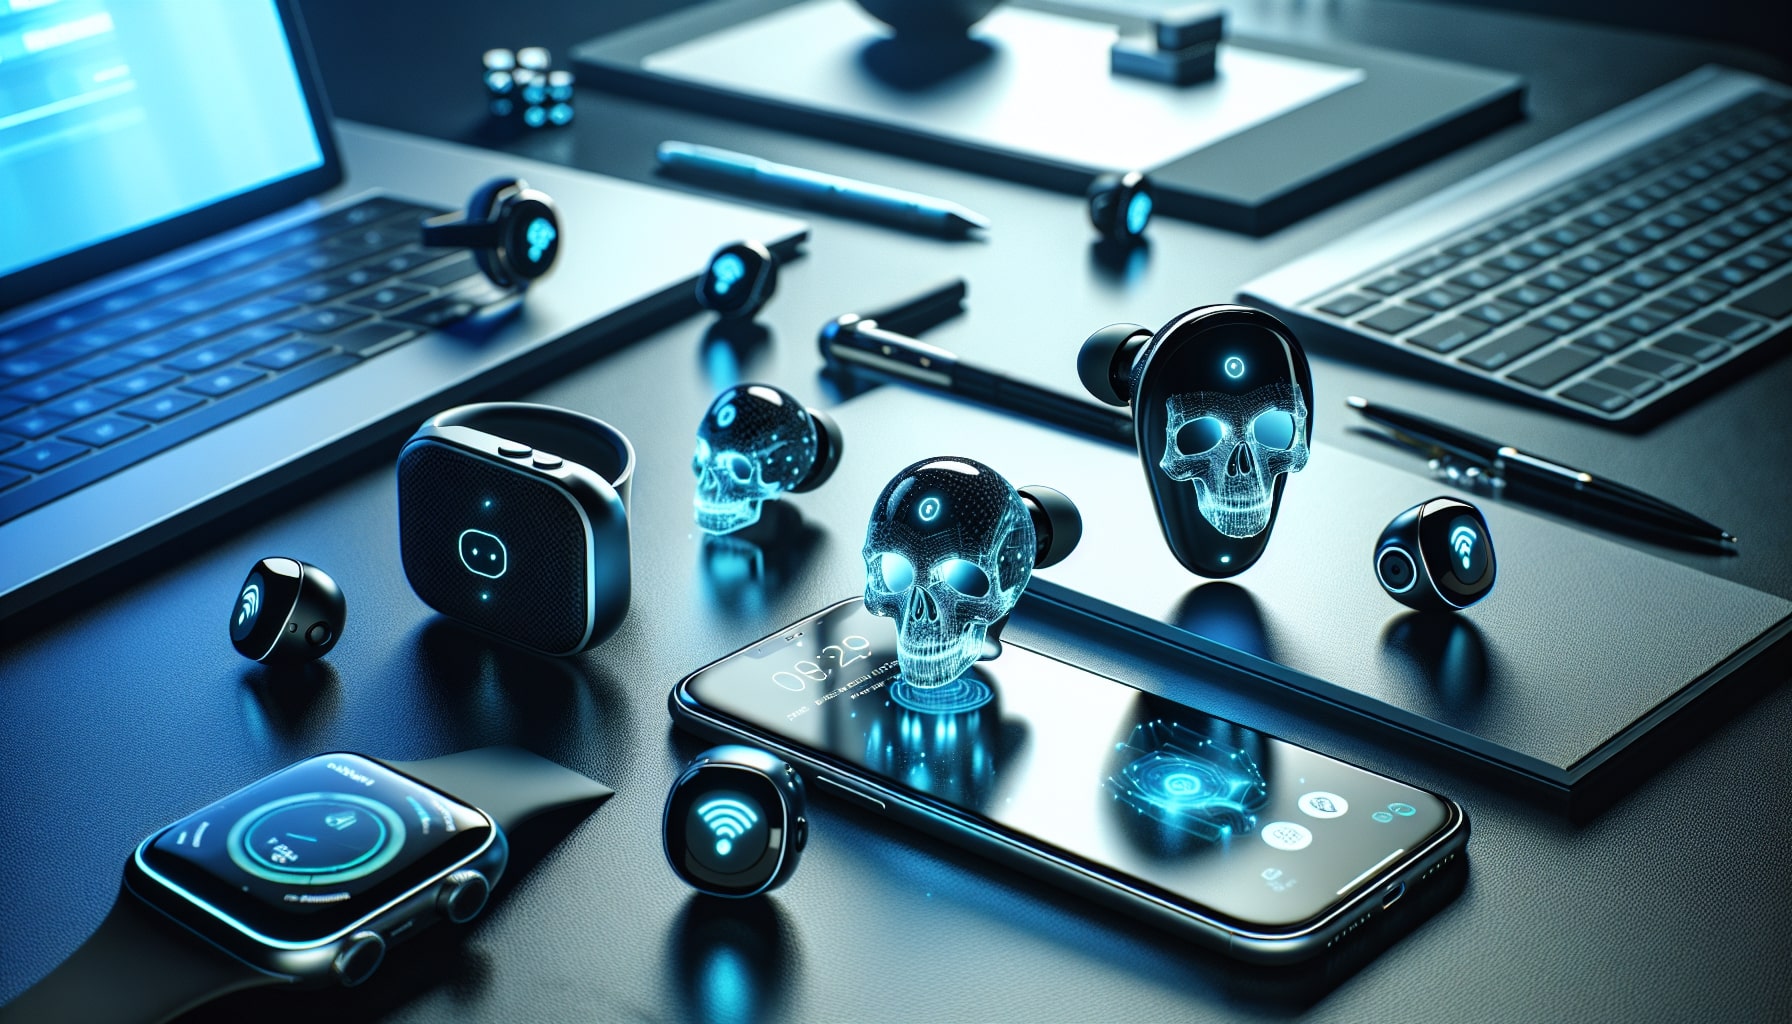 Futuristic tech devices with holographic skull imagery.